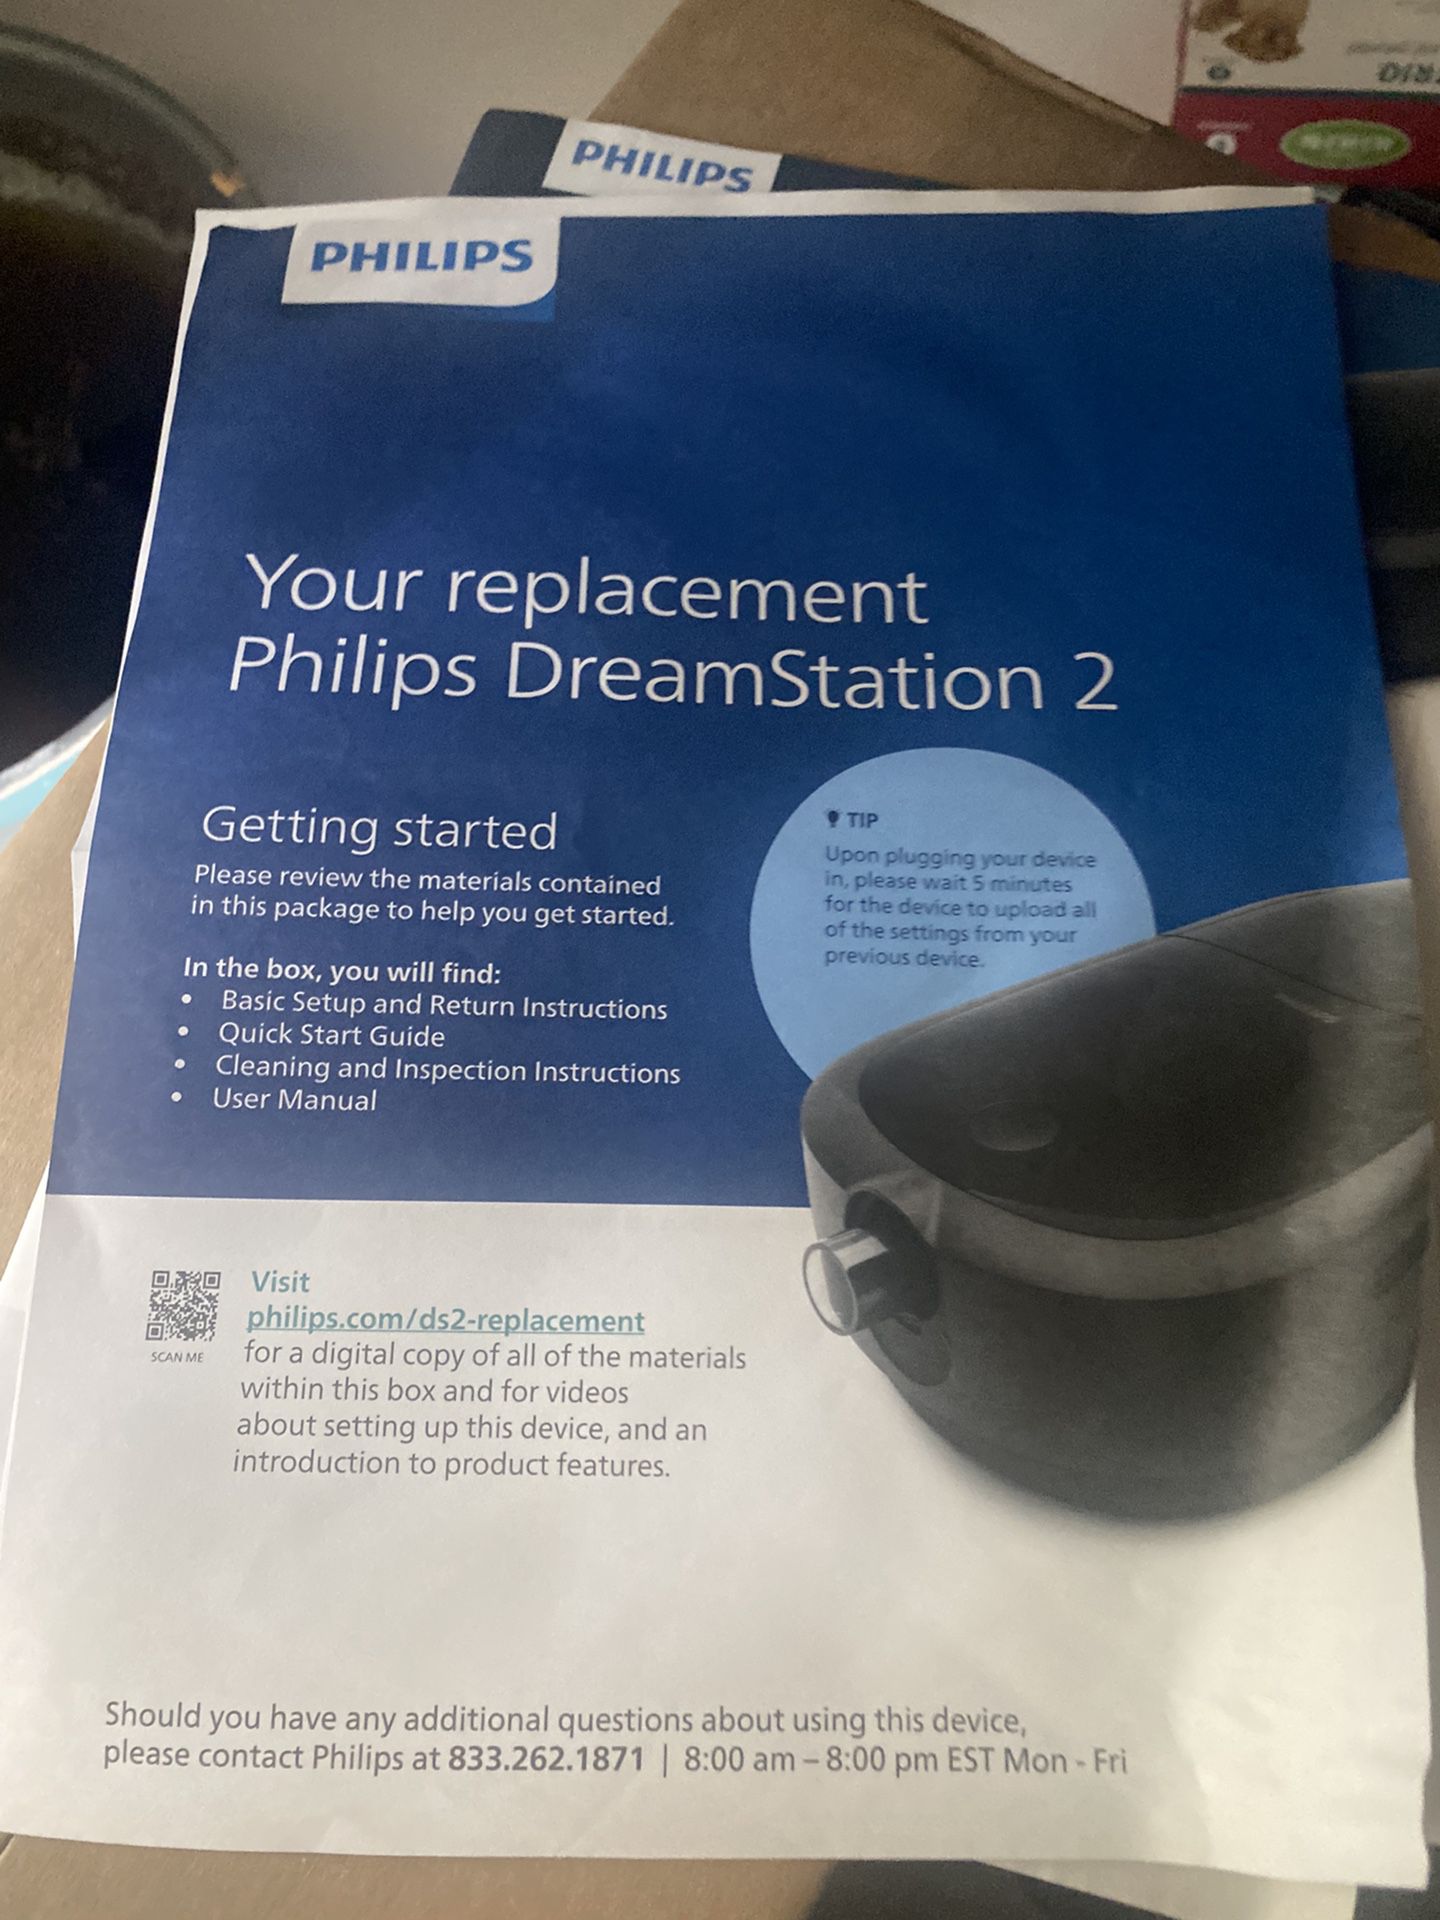 Philips DreamStation 2